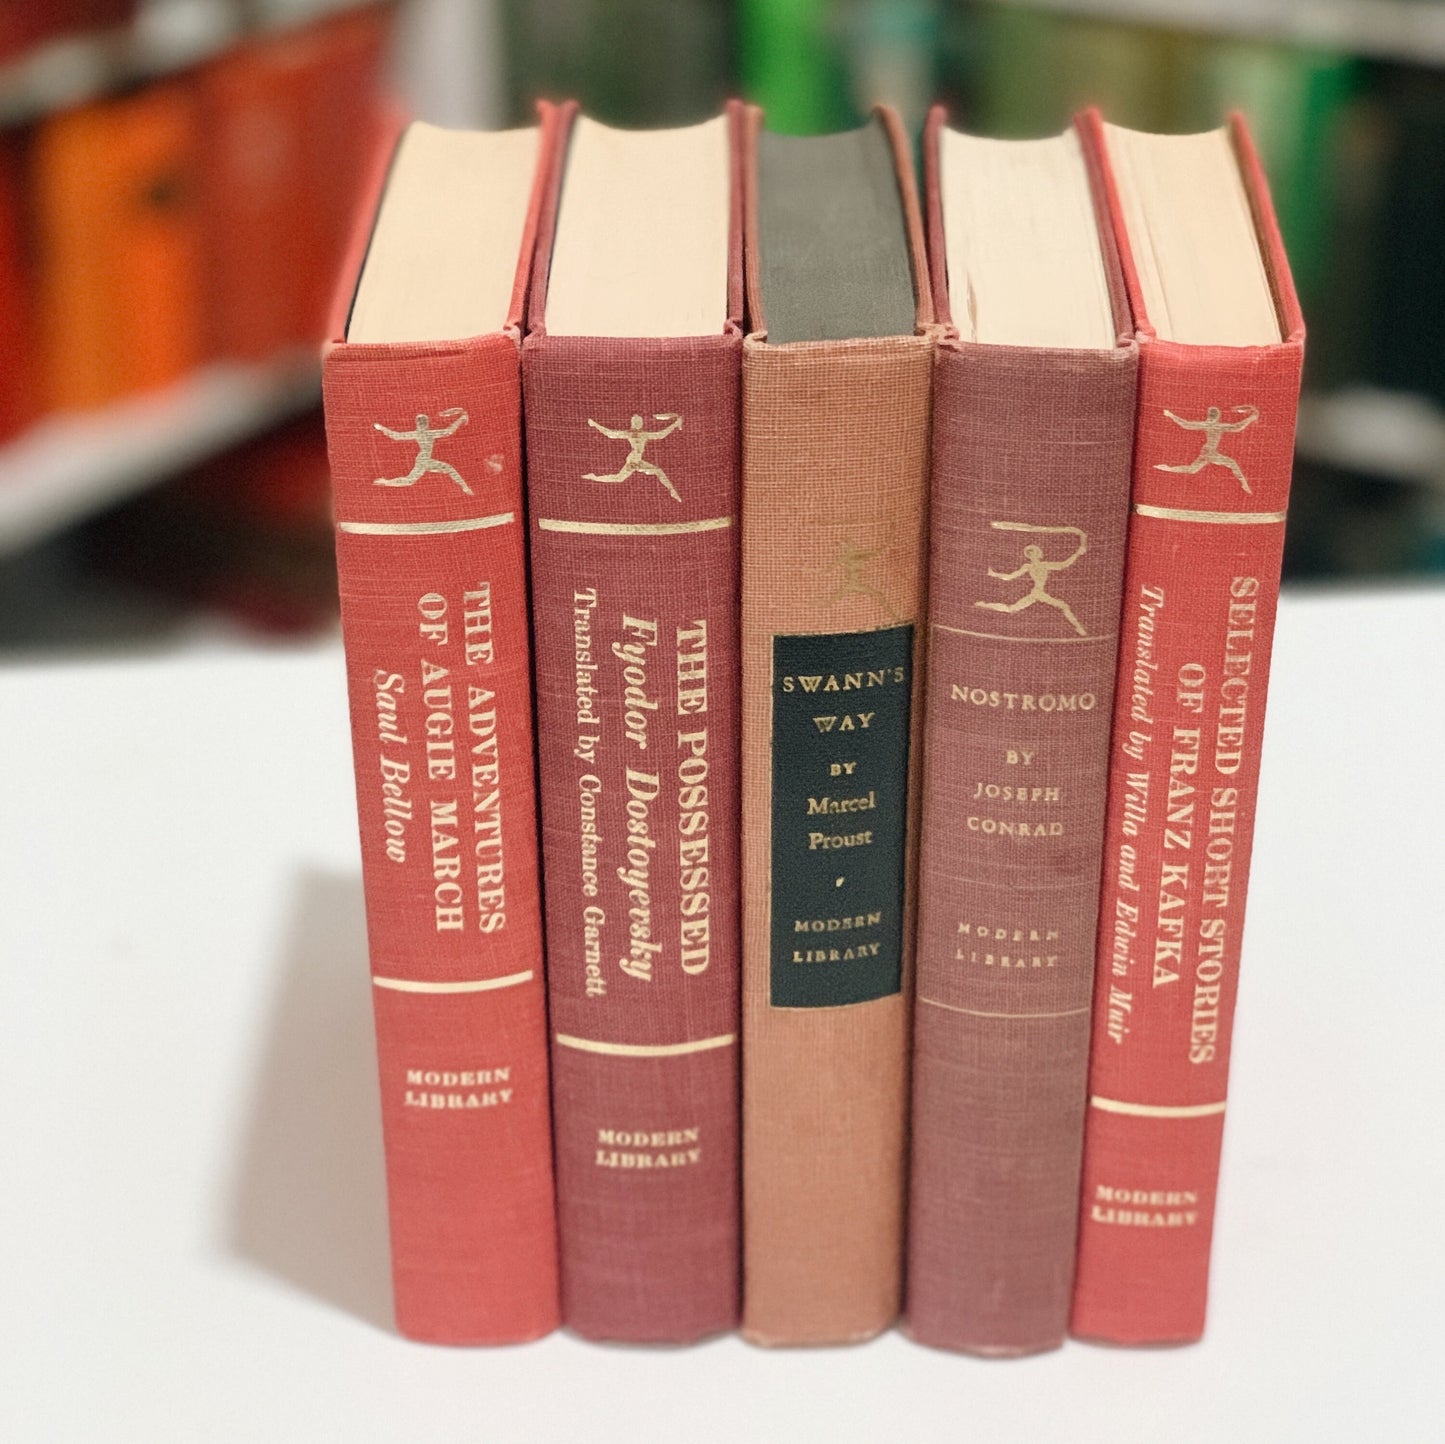 Modern Library Red - Coral - Rust Book Set, Mid-Century Books for Bookshelf Decor